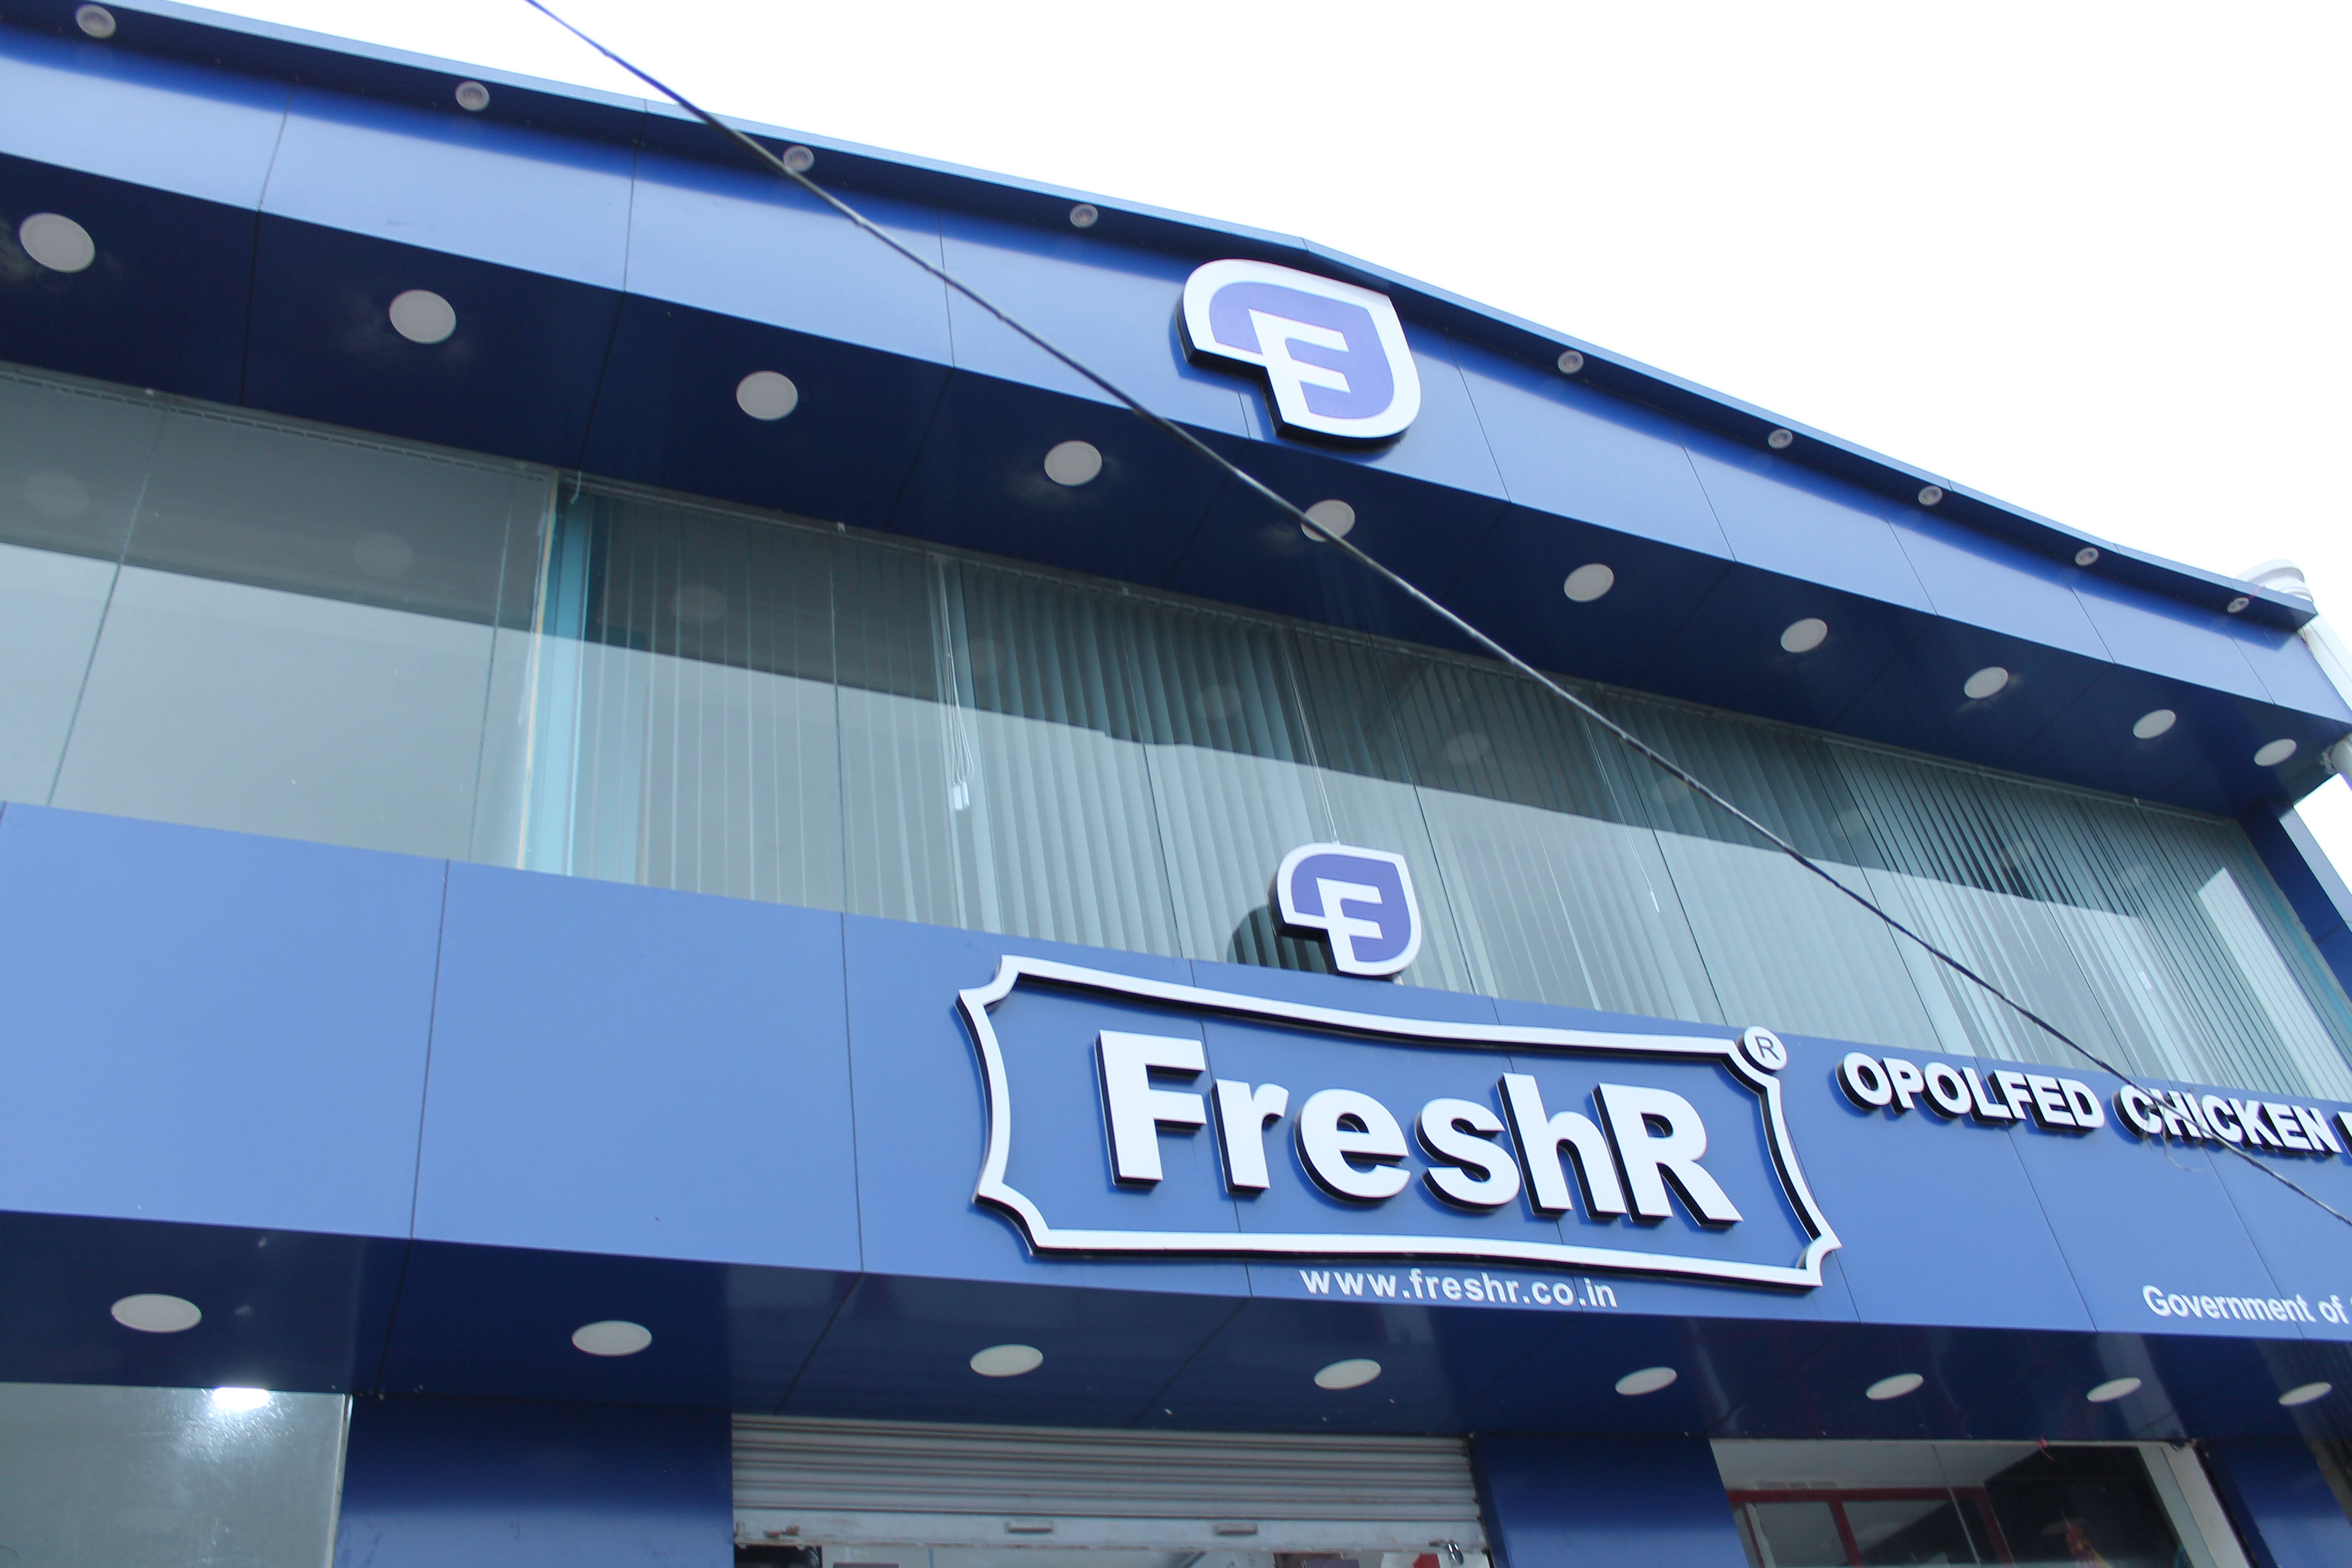 A distribution center for FreshR in Bhawanipatna, India.